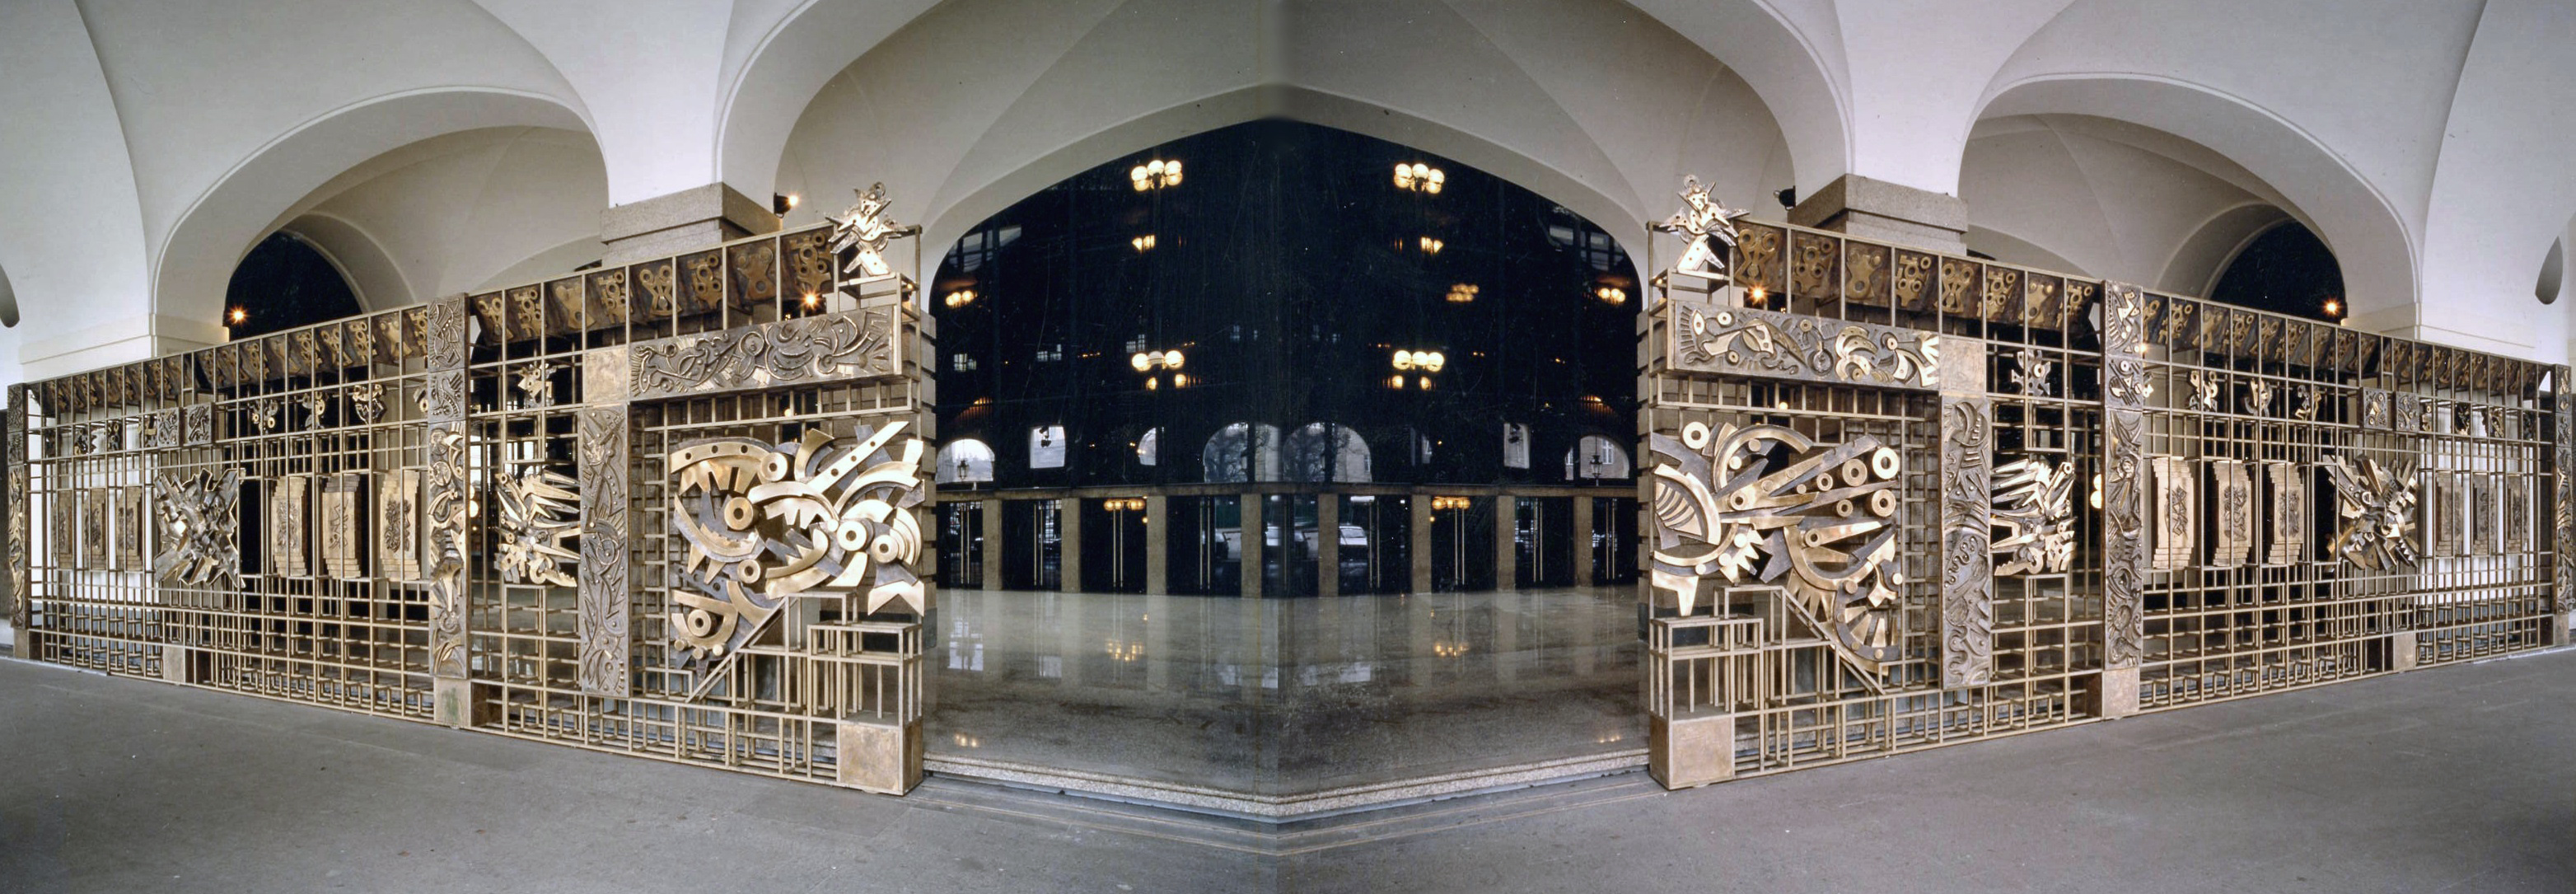 Perspective photomontage of the main entrance of the Theatre with the bronze gate “Odissea musicale”, by Umberto Mastroianni